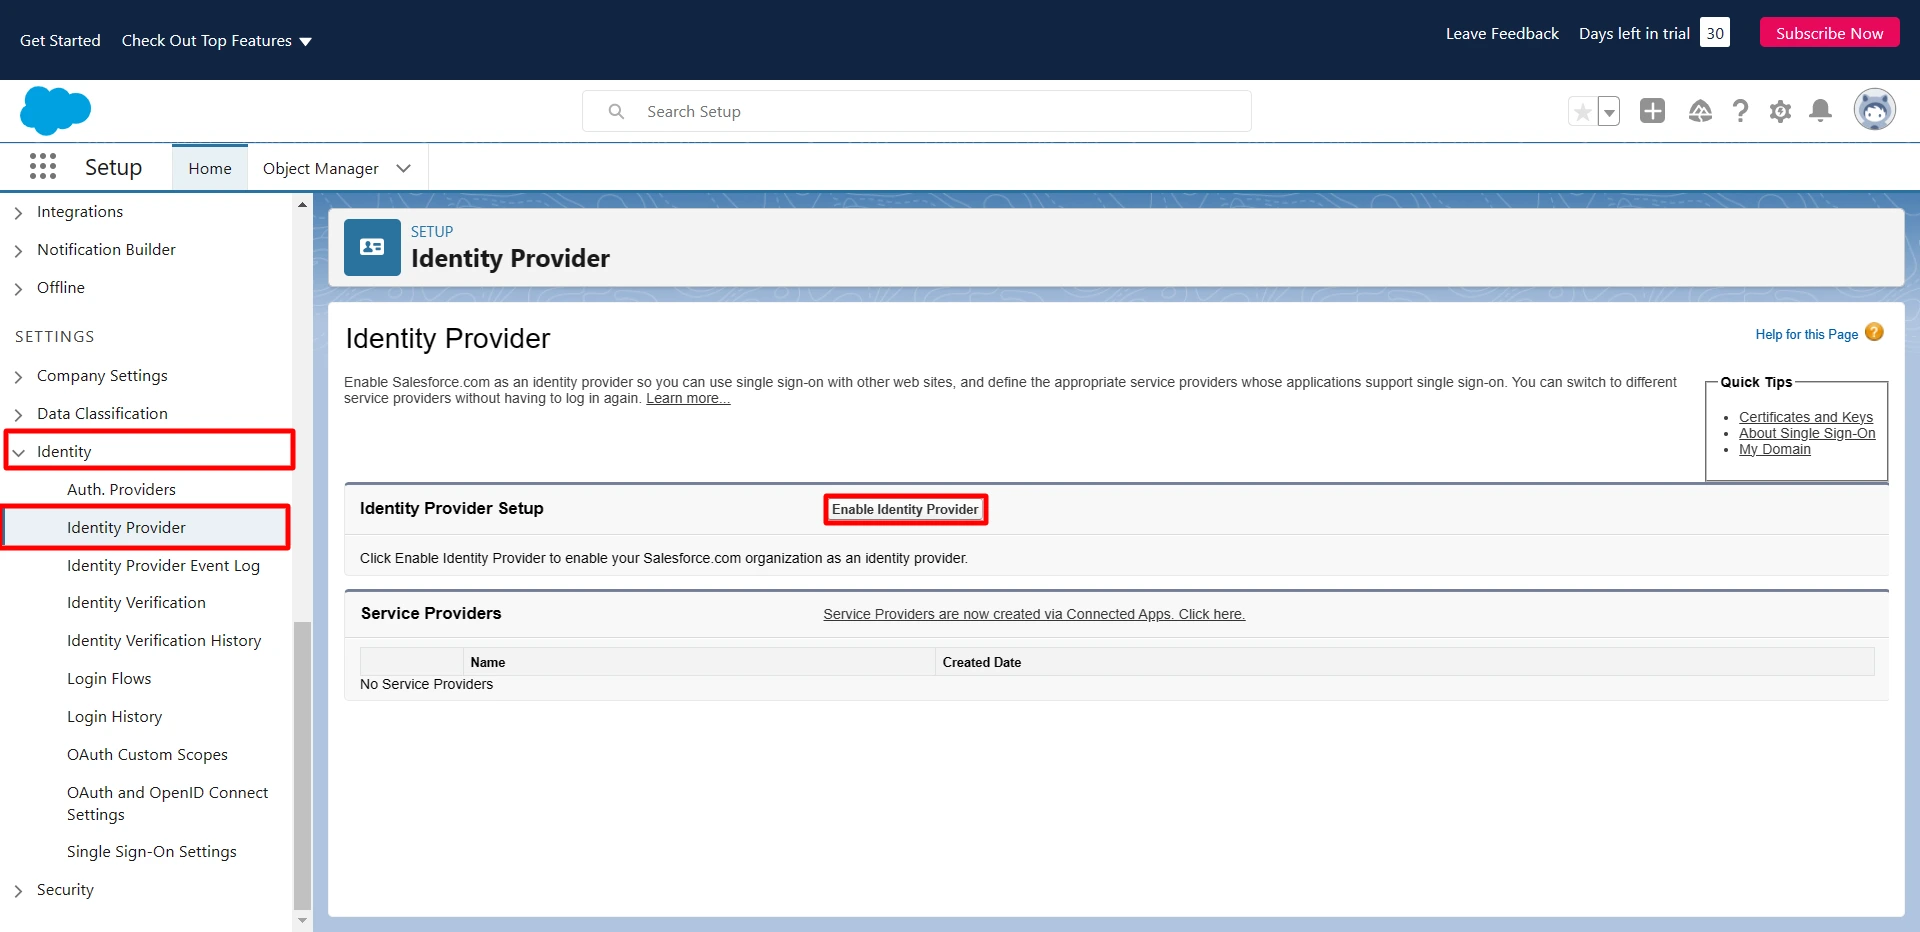 Security Controls and click on Enable identity provider